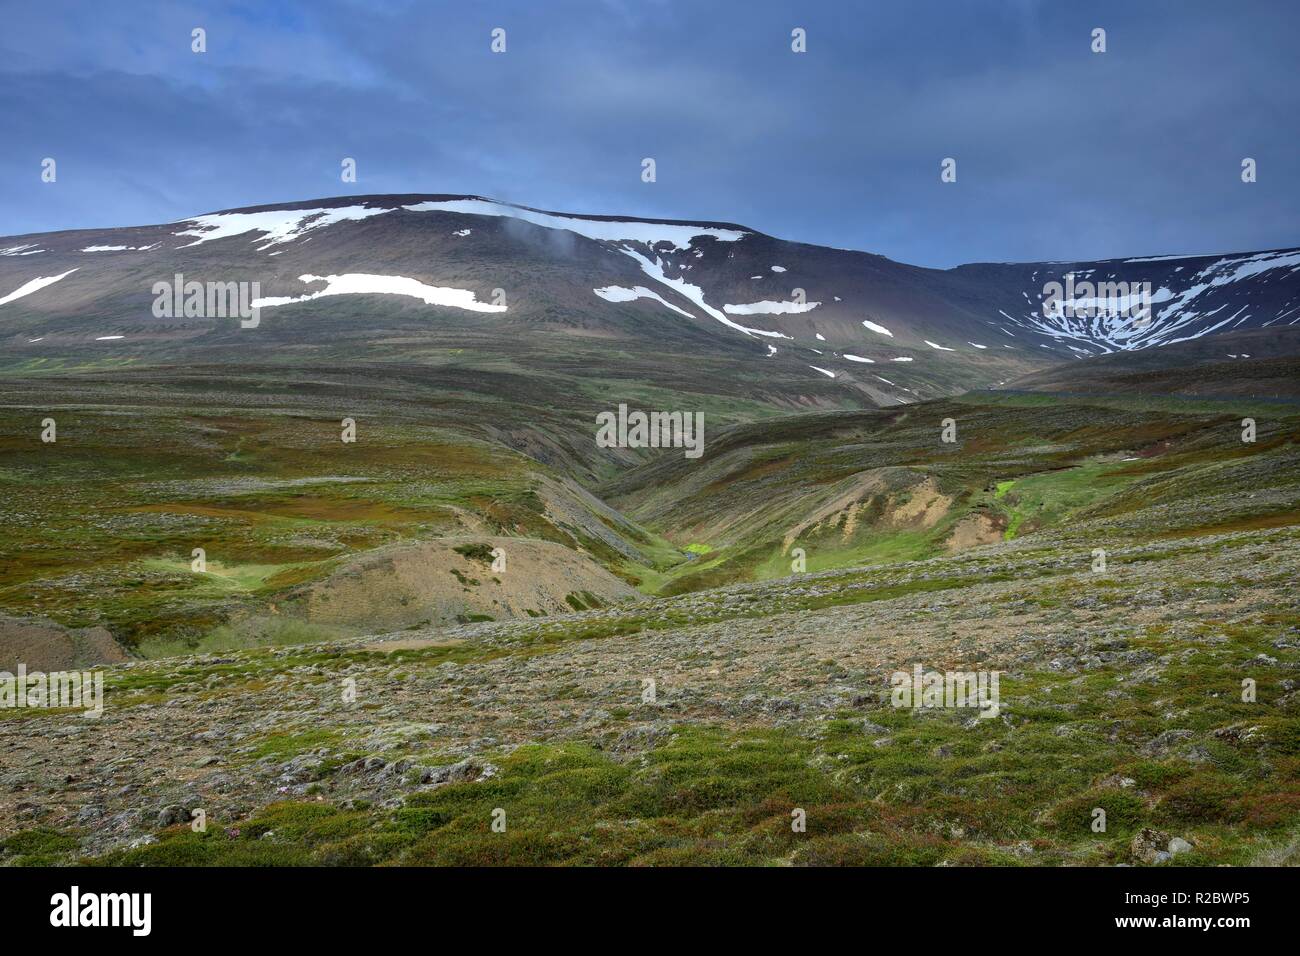 Icelandic landscape with the Tindastoll mountains in the background and barren grassland in the front. Peninsula Skagi. Stock Photo